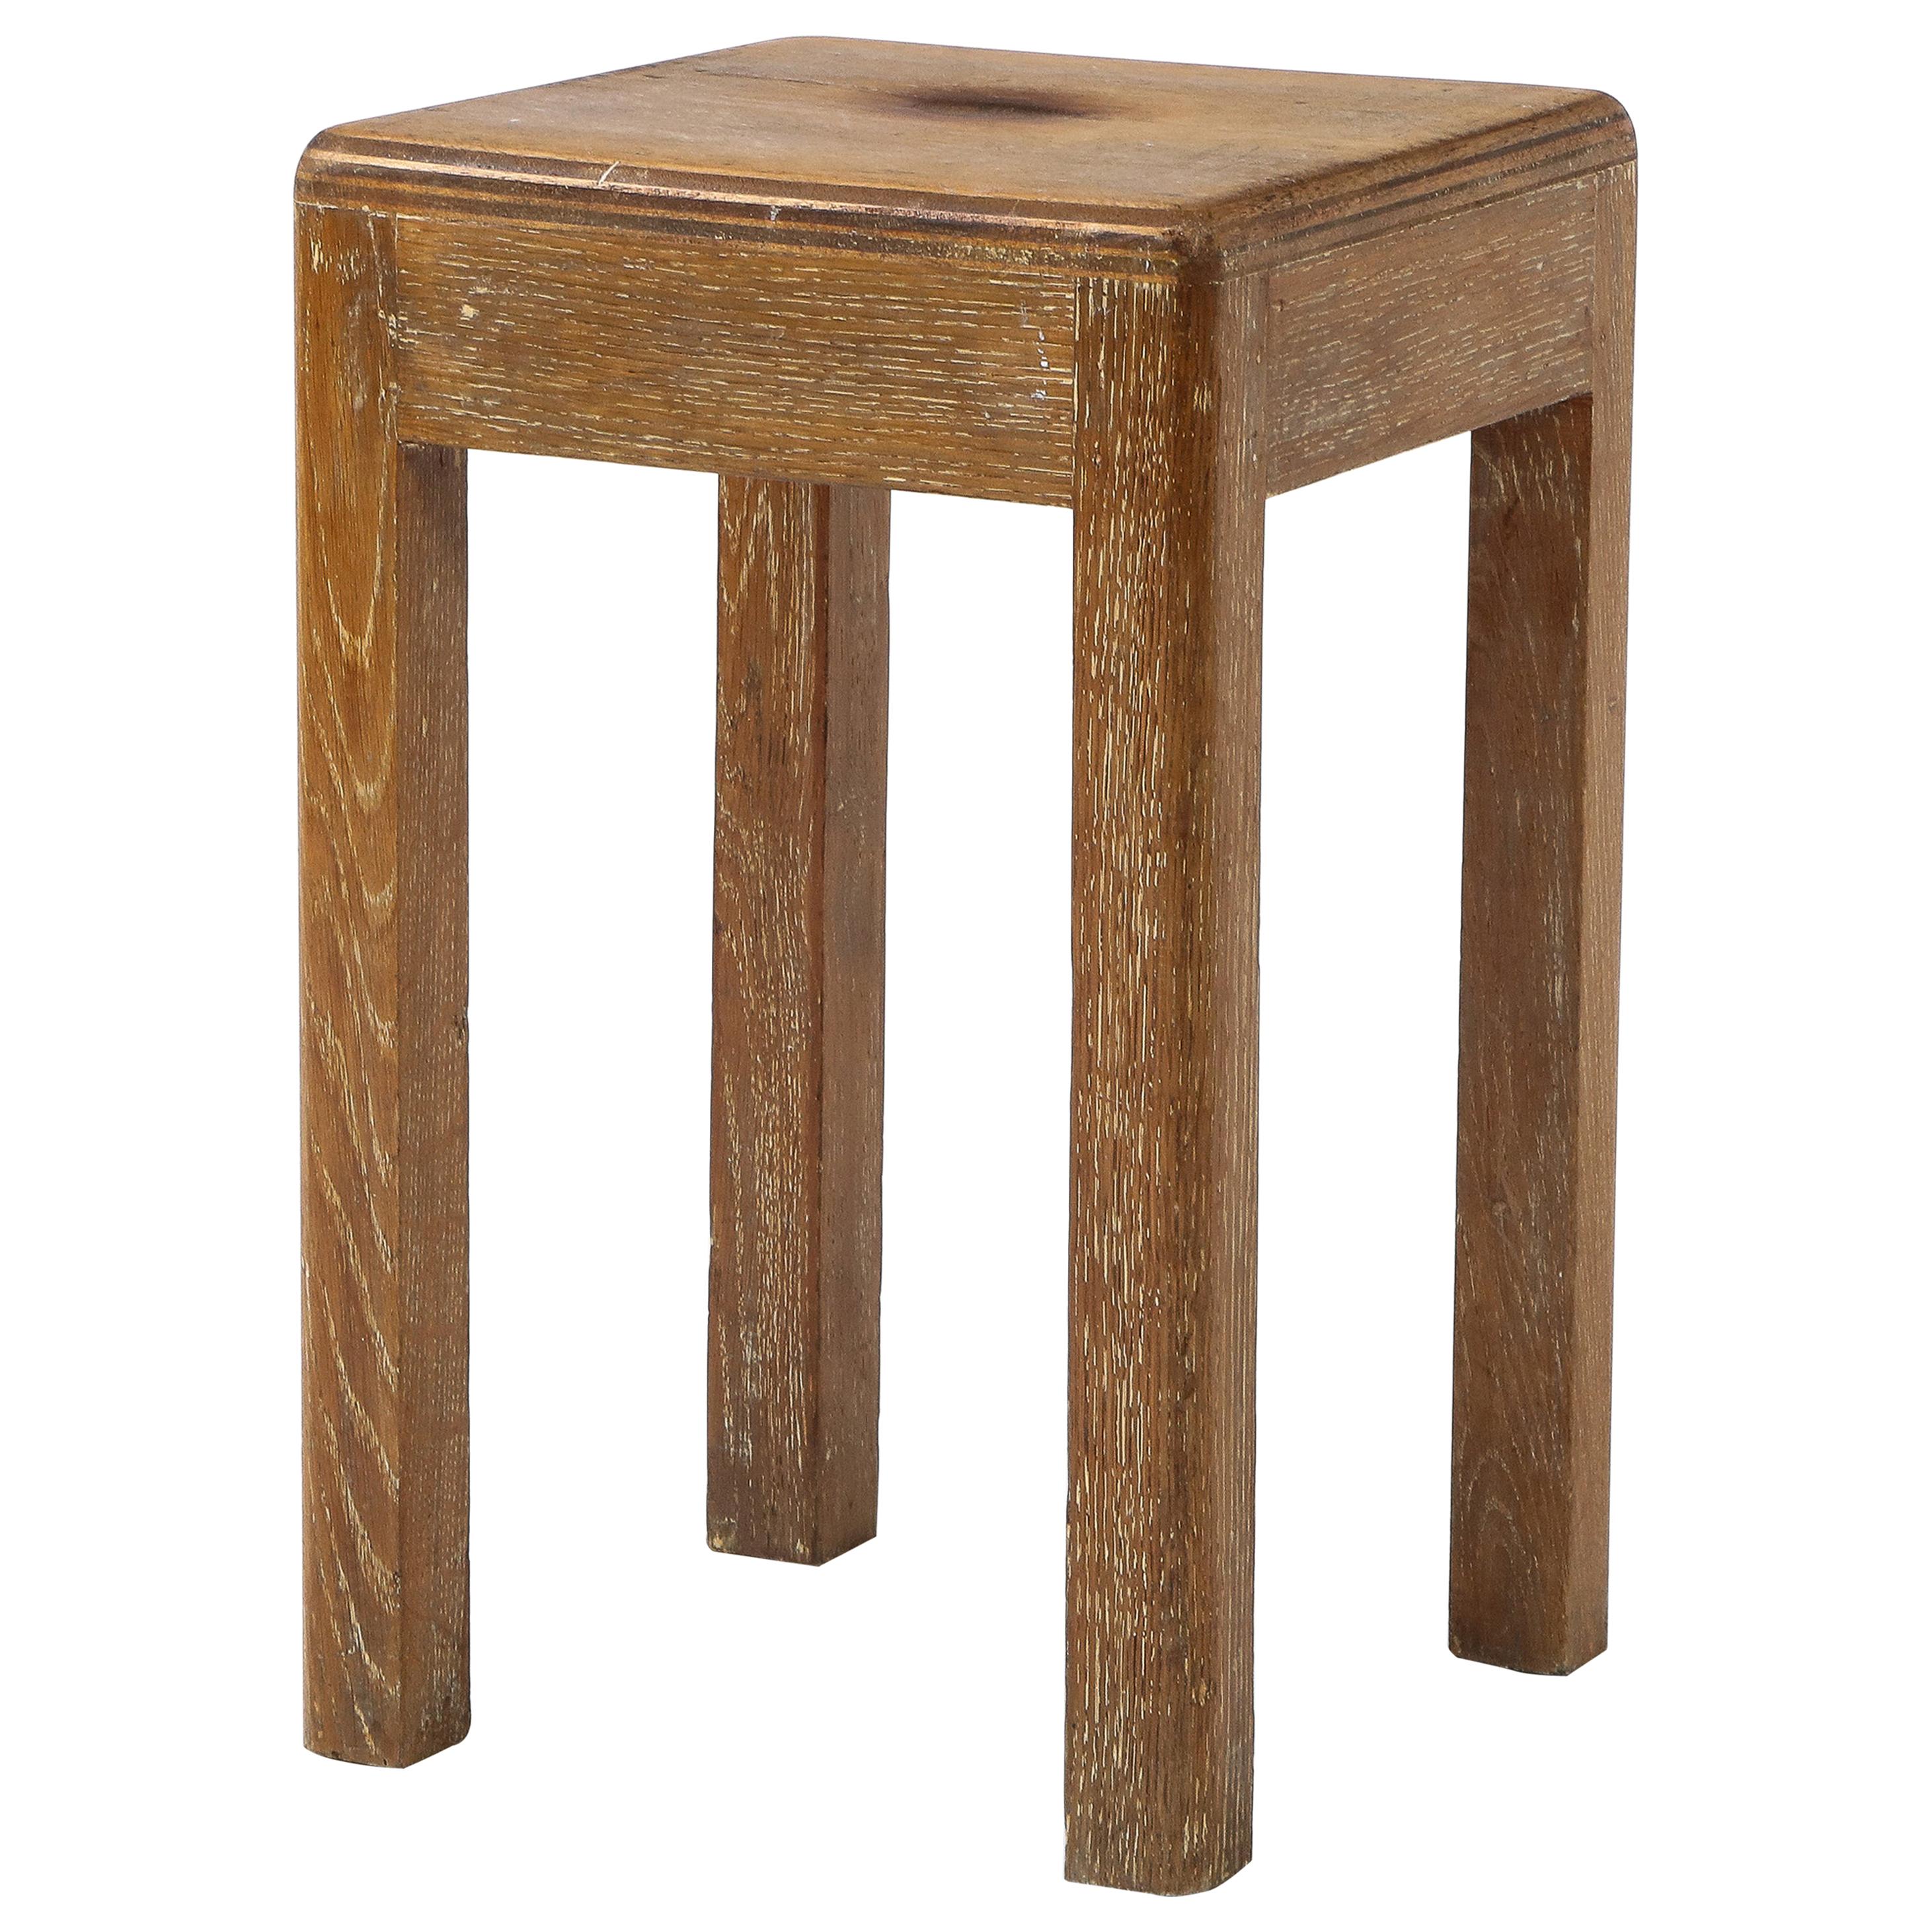 Petite Midcentury French Oak Stool or Small Side Table